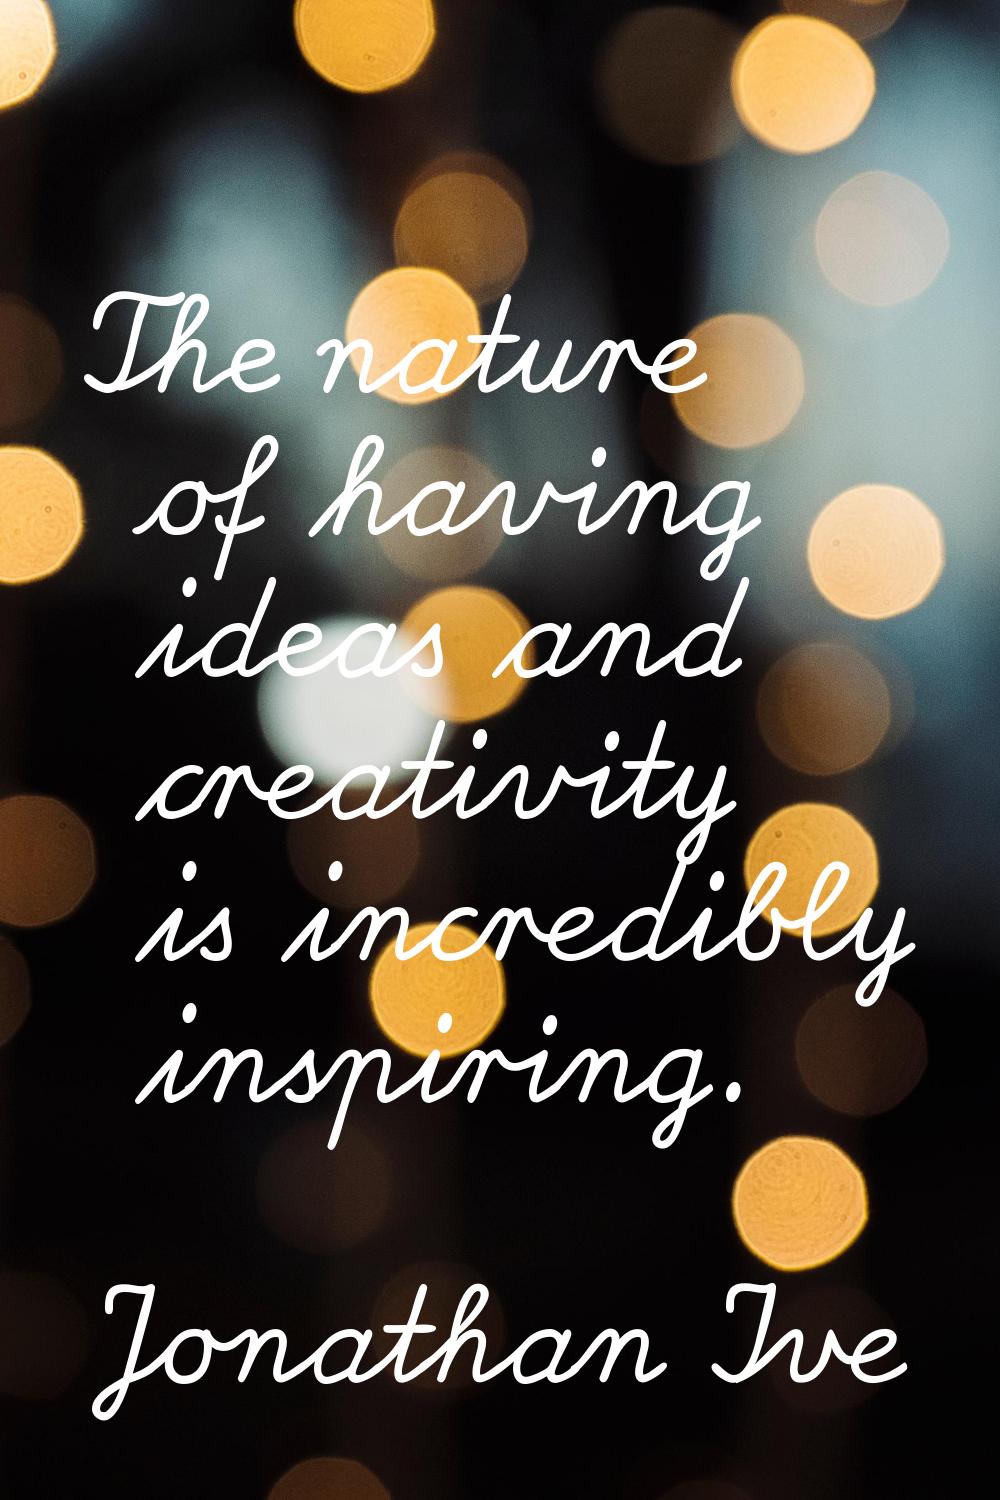 The nature of having ideas and creativity is incredibly inspiring.